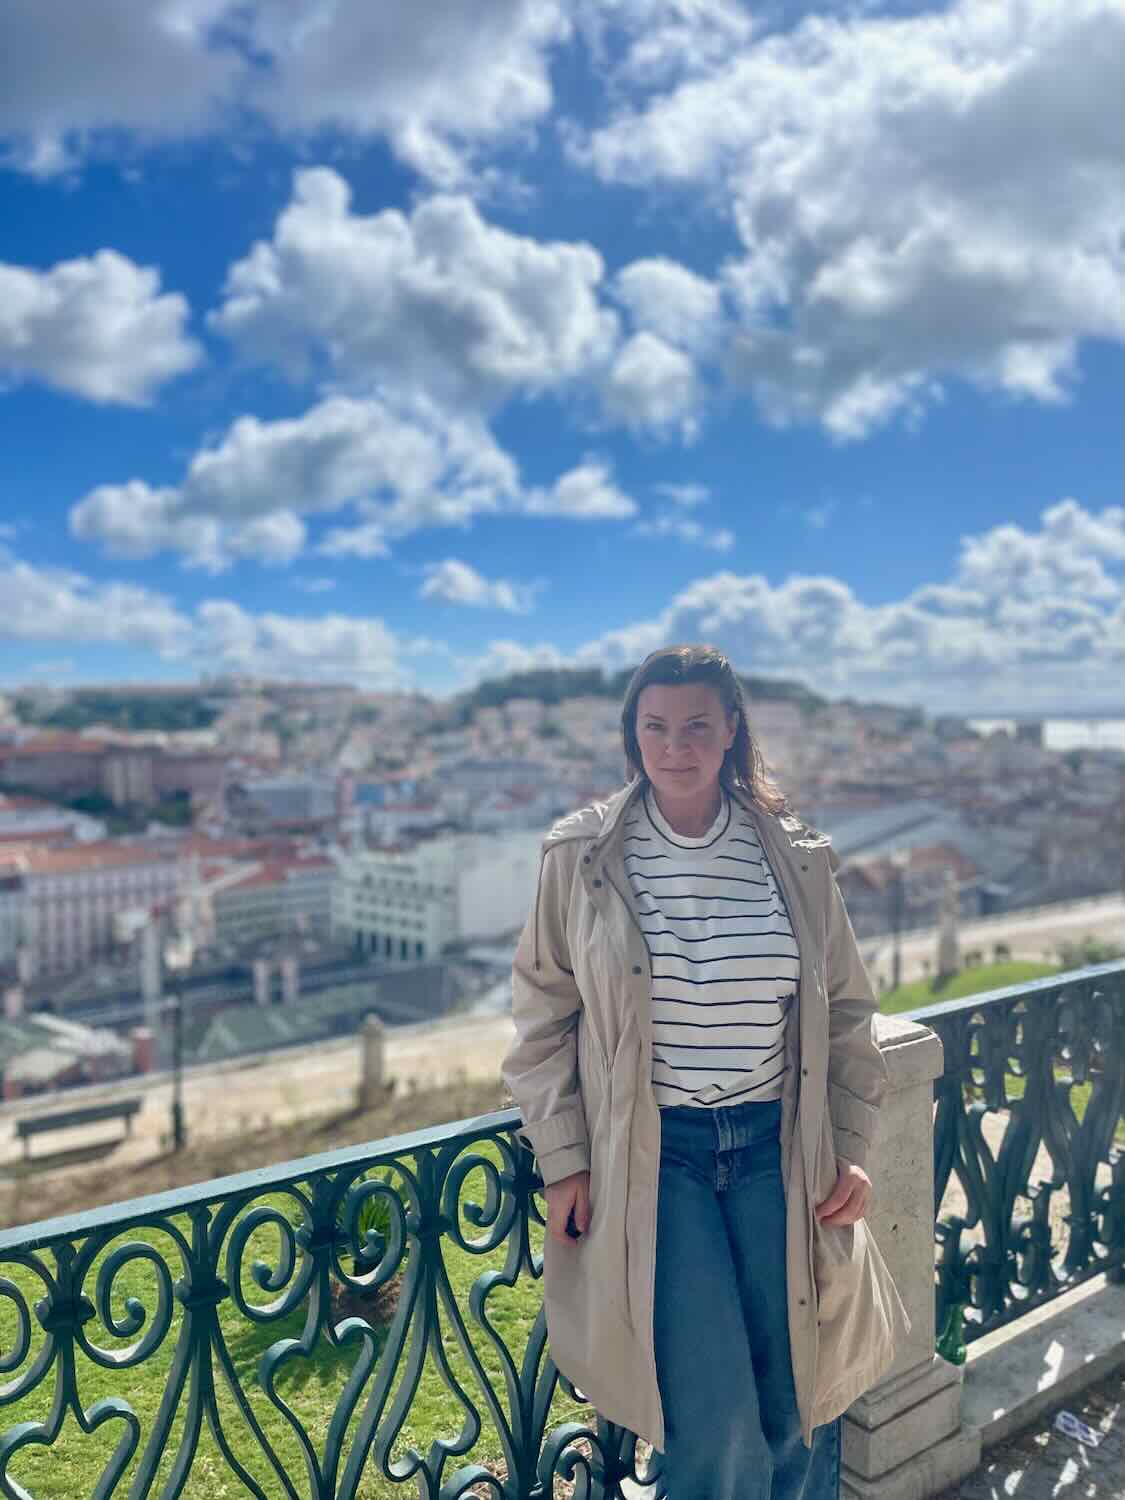 A woman traveler enjoys the view from a high vantage point in Lisbon, overlooking the city's rooftops under a partly cloudy sky